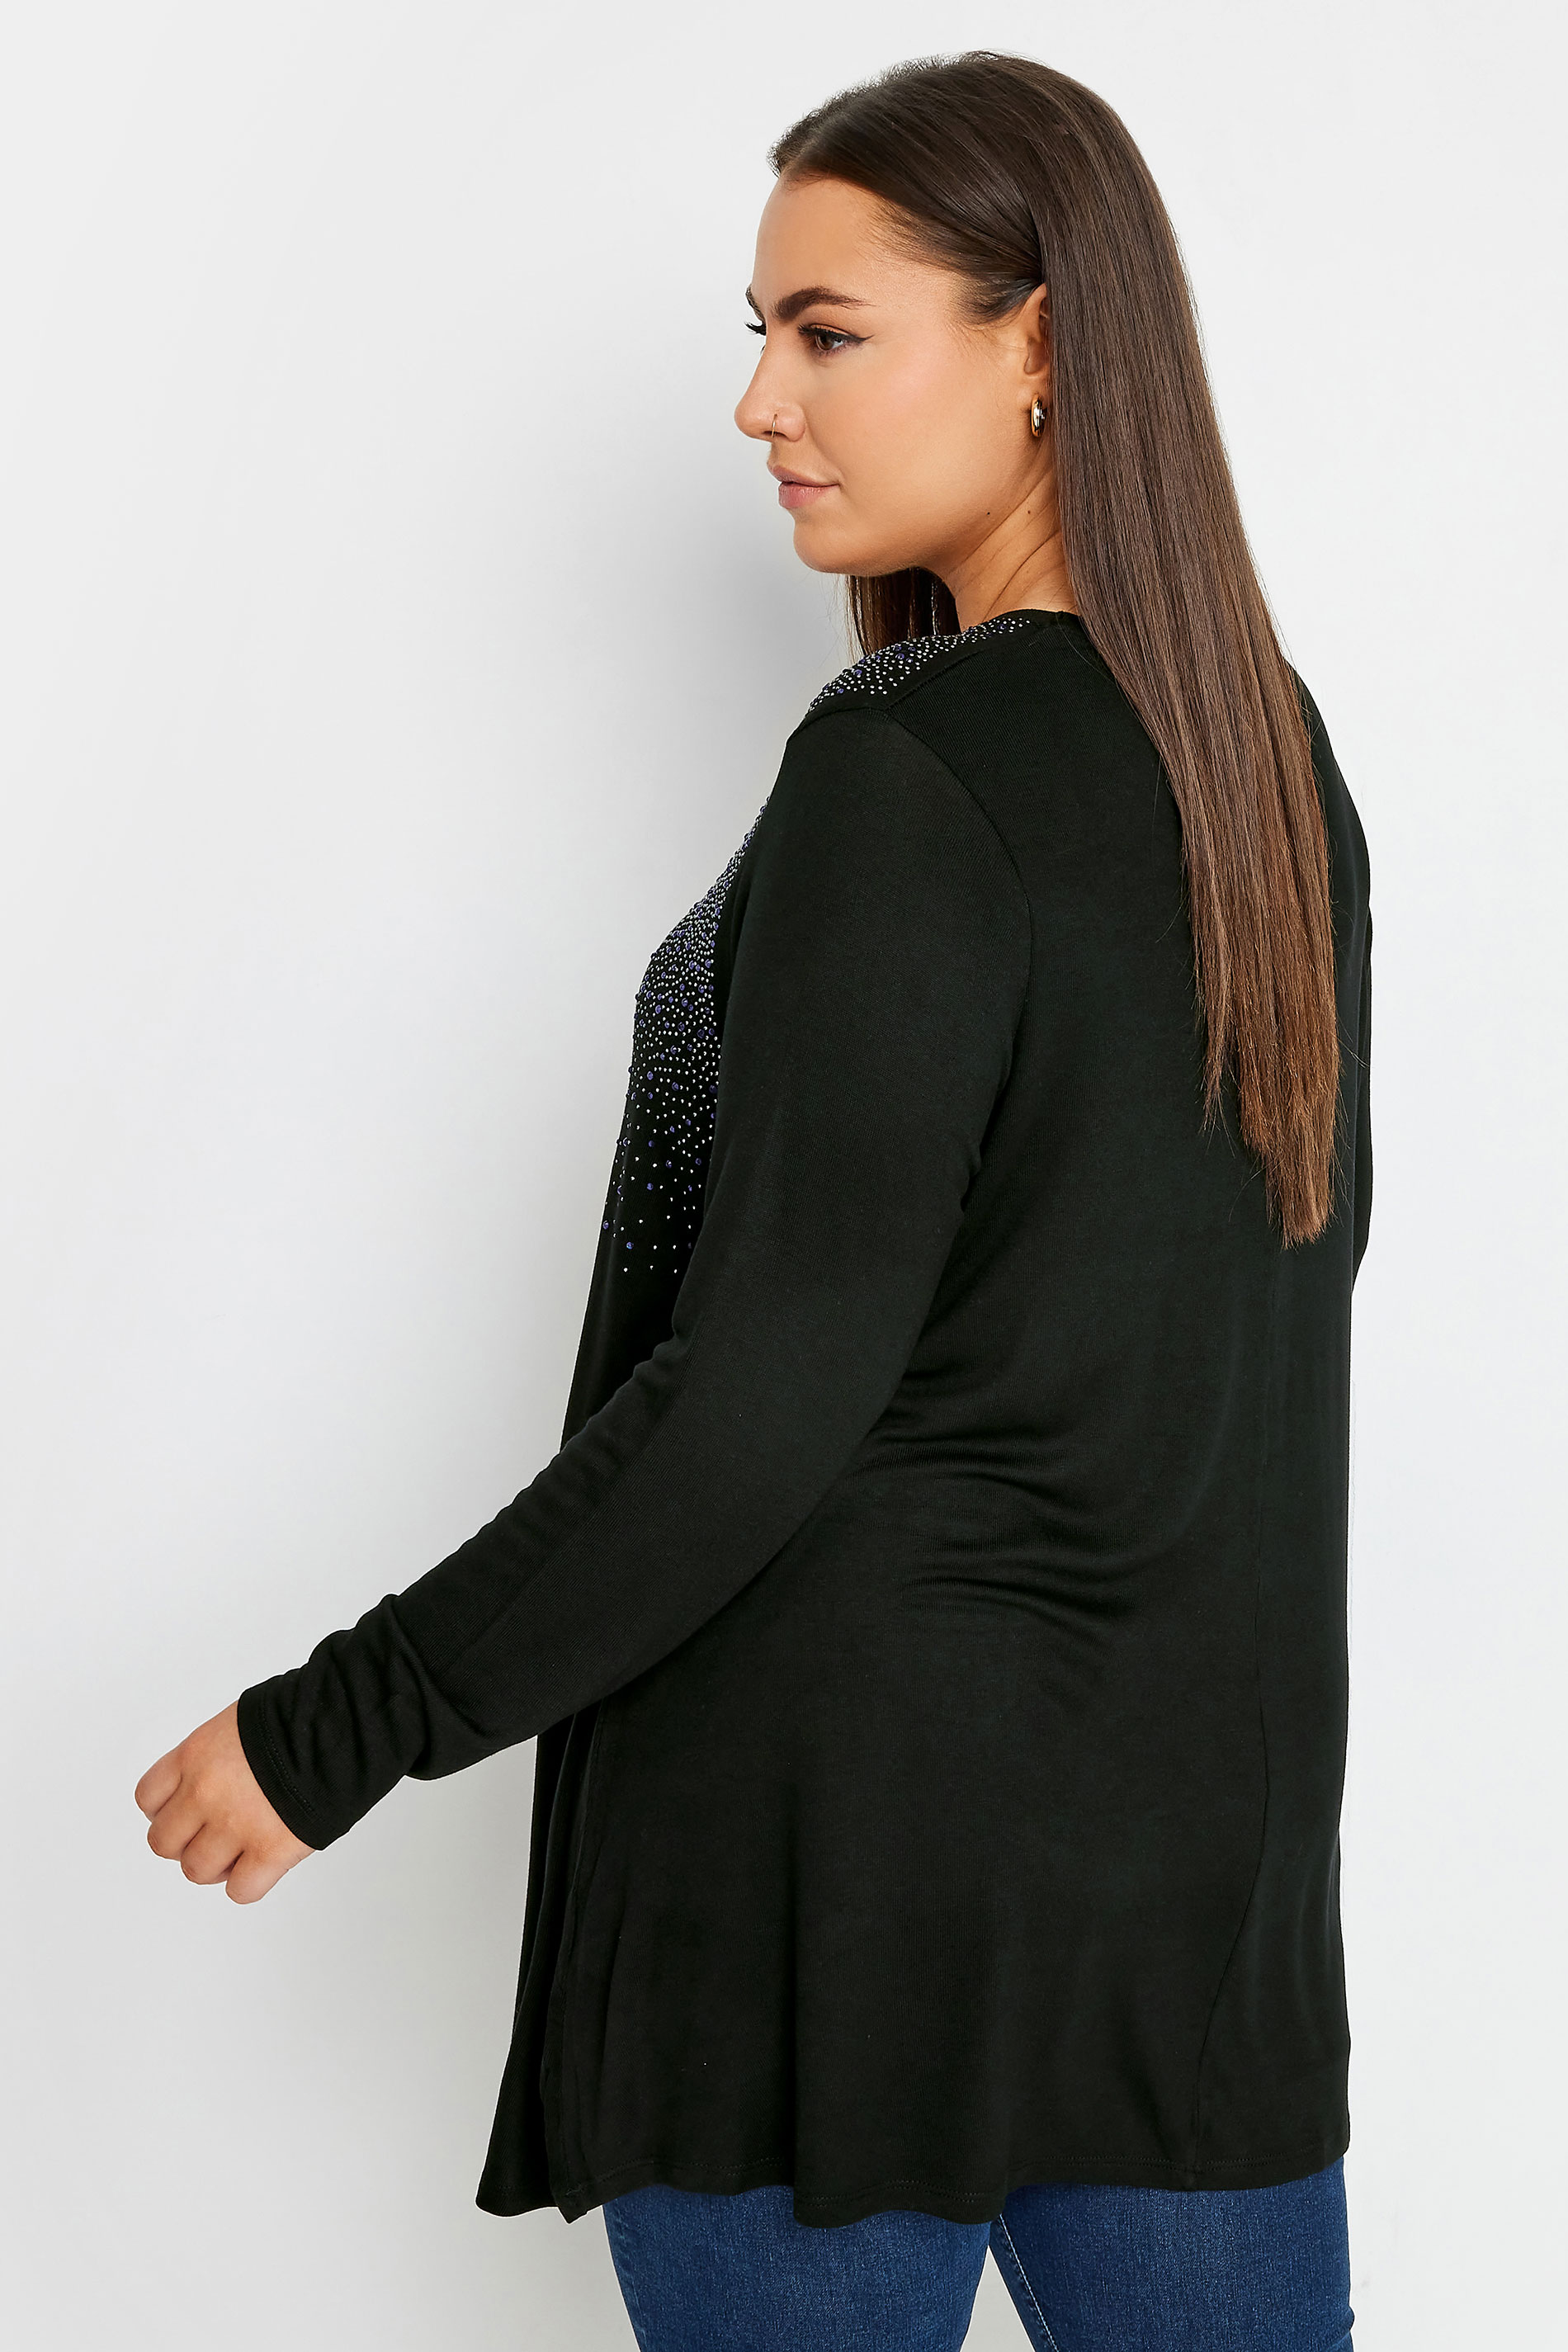 YOURS Plus Size Black Stud Embellished Top | Yours Clothing 3